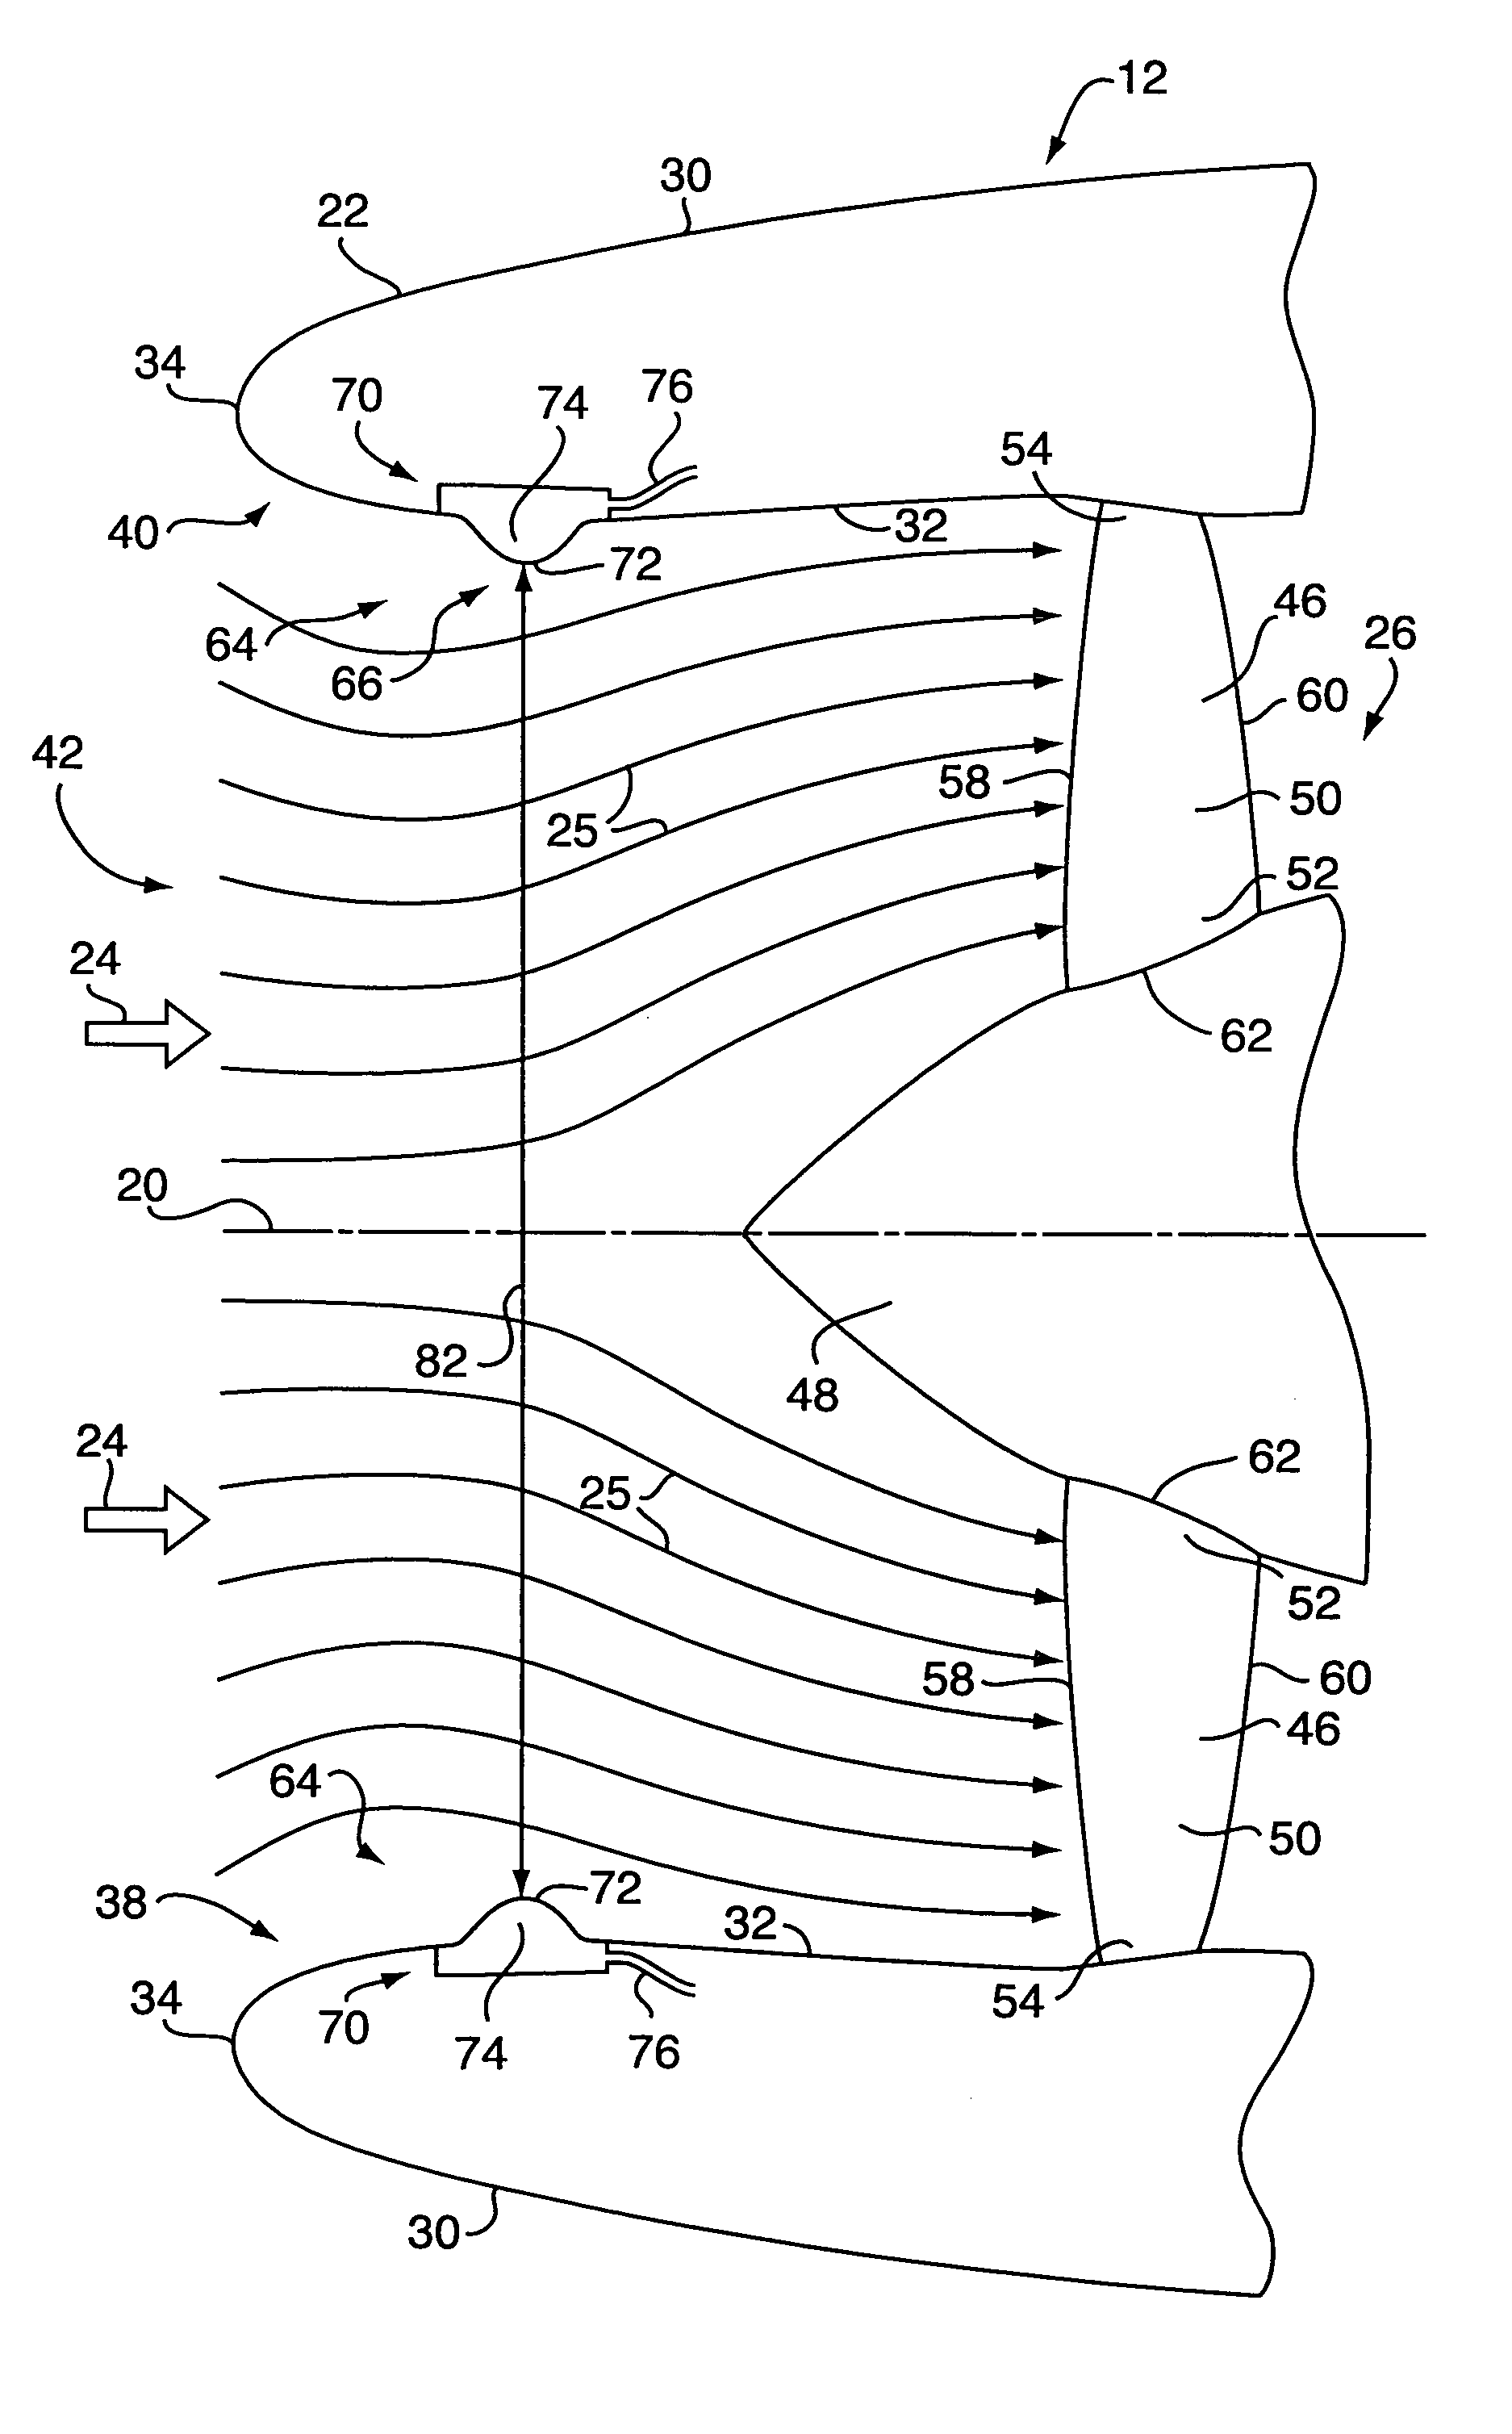 Gas turbine engine inlet with noise reduction features